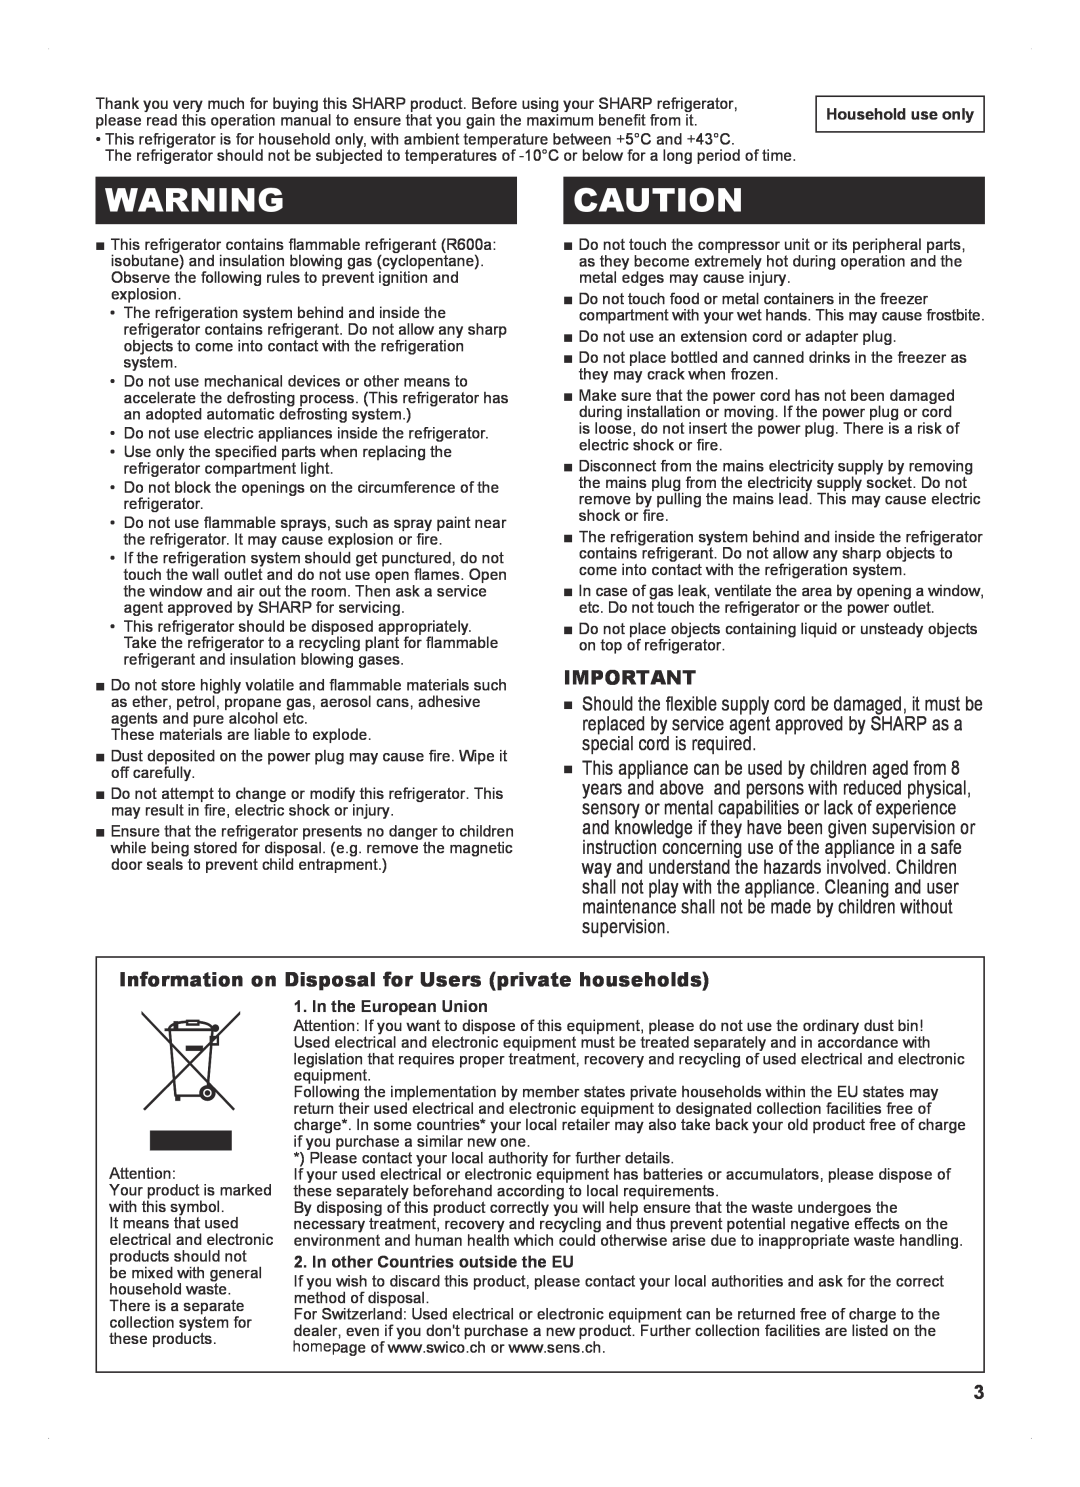 Sharp SJ-FP813V operation manual Warningcaution, Information on Disposal for Users private households 